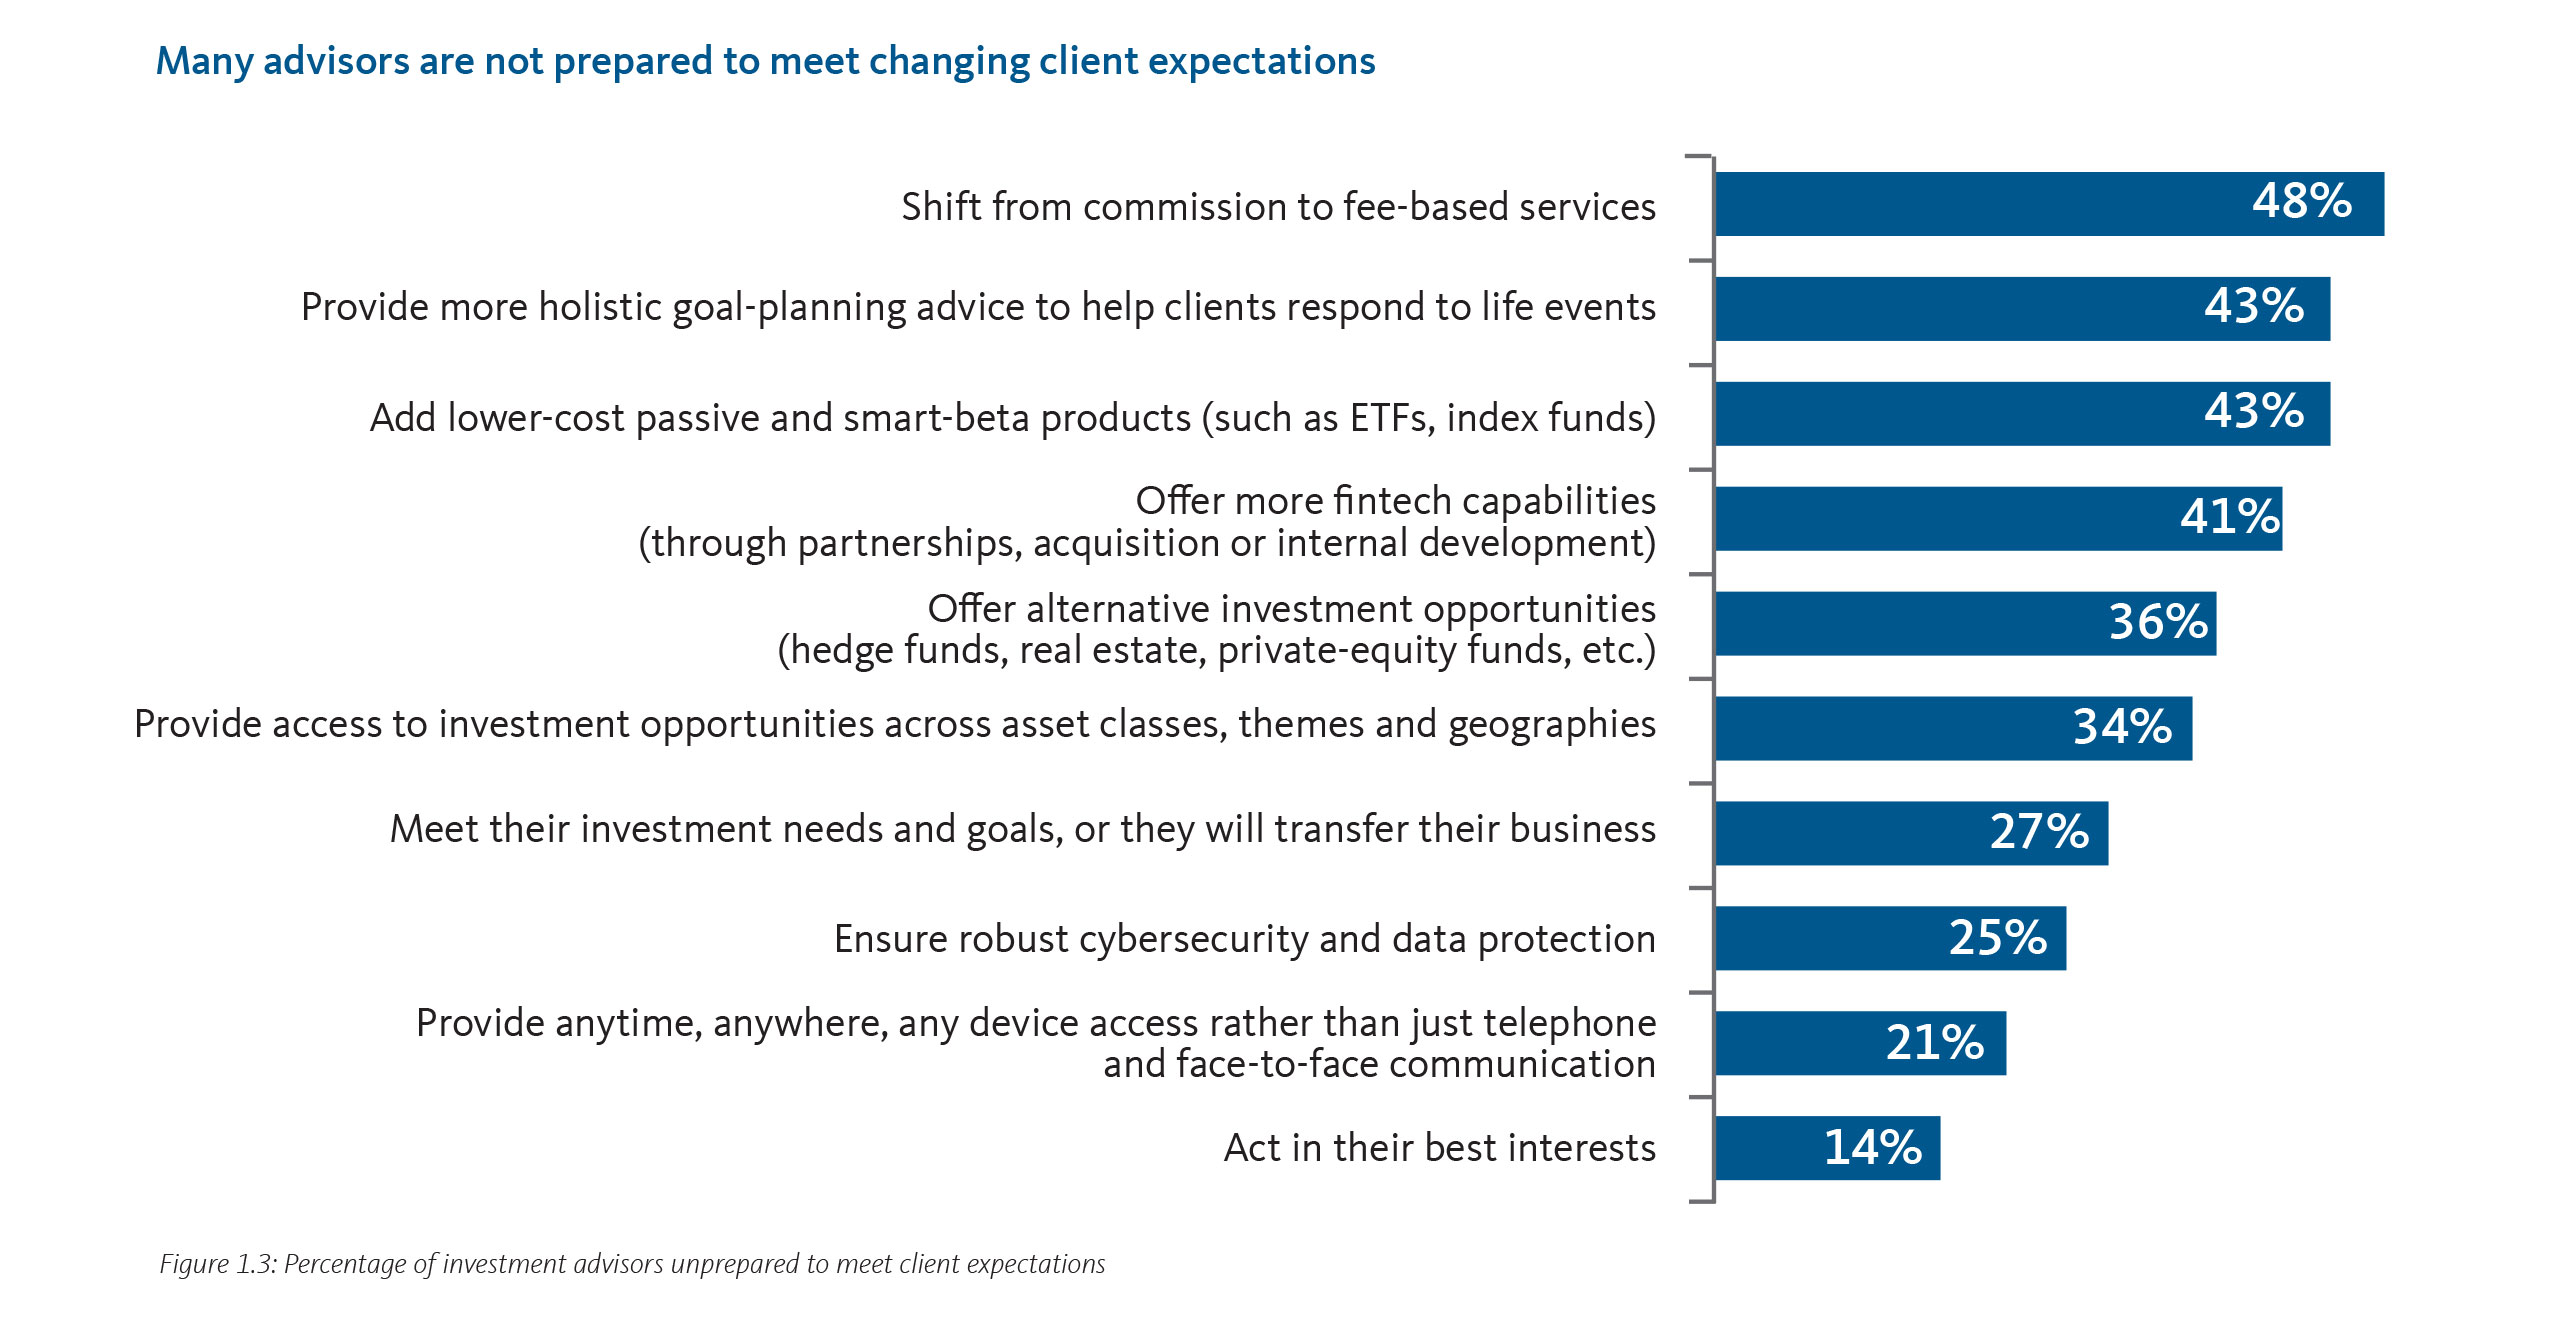 Many advisors are not prepared to meet changing client expectations